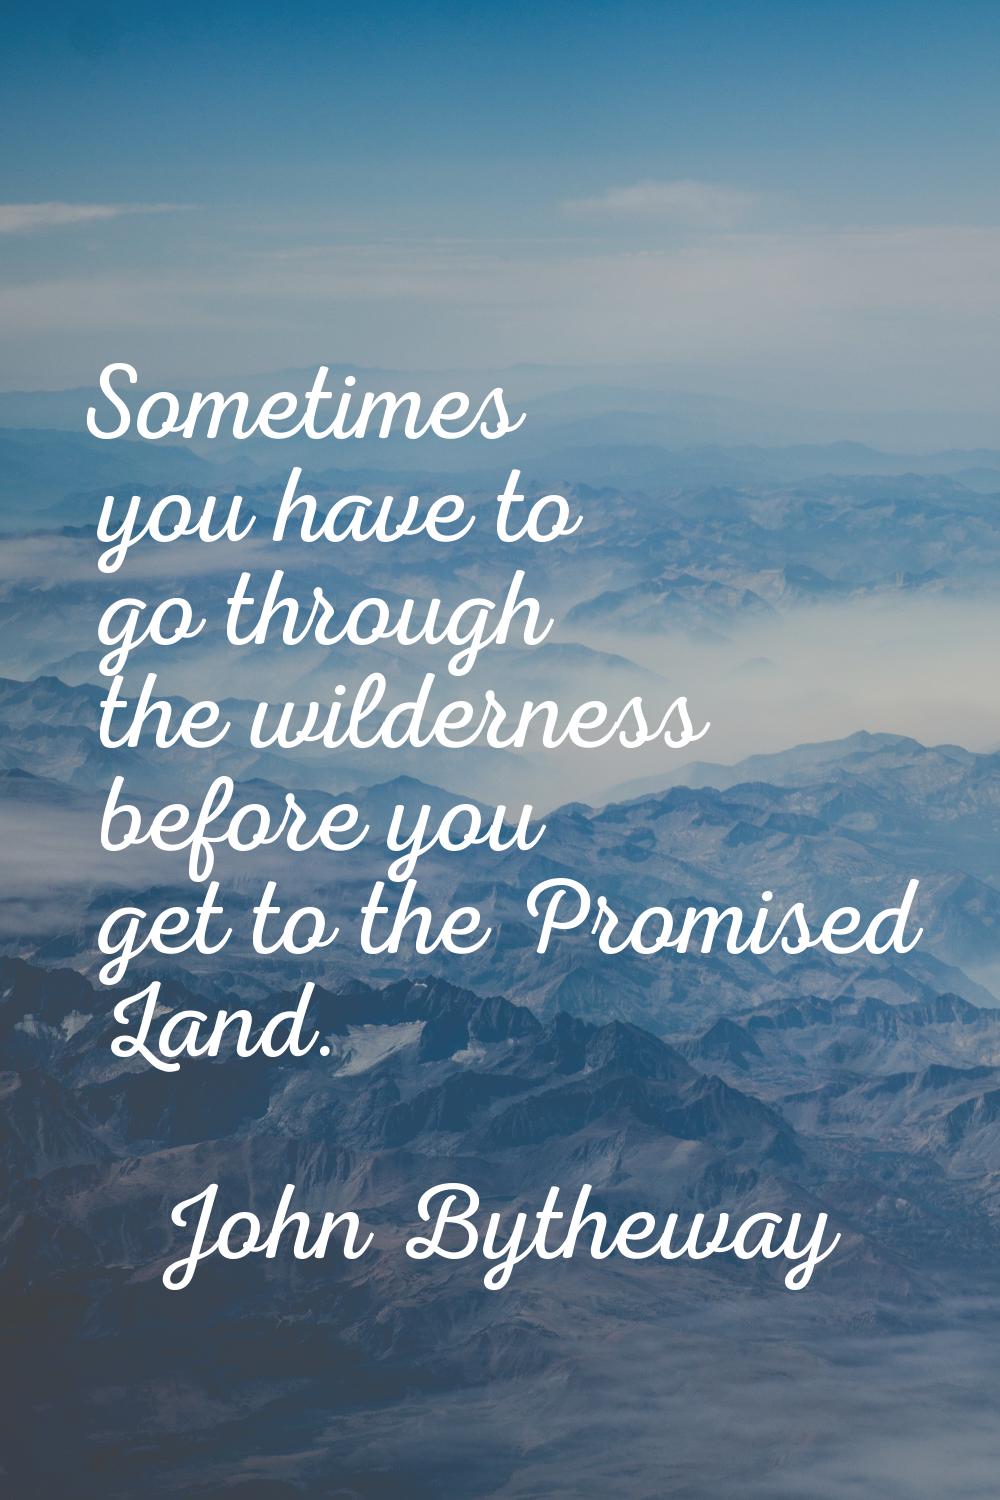 Sometimes you have to go through the wilderness before you get to the Promised Land.